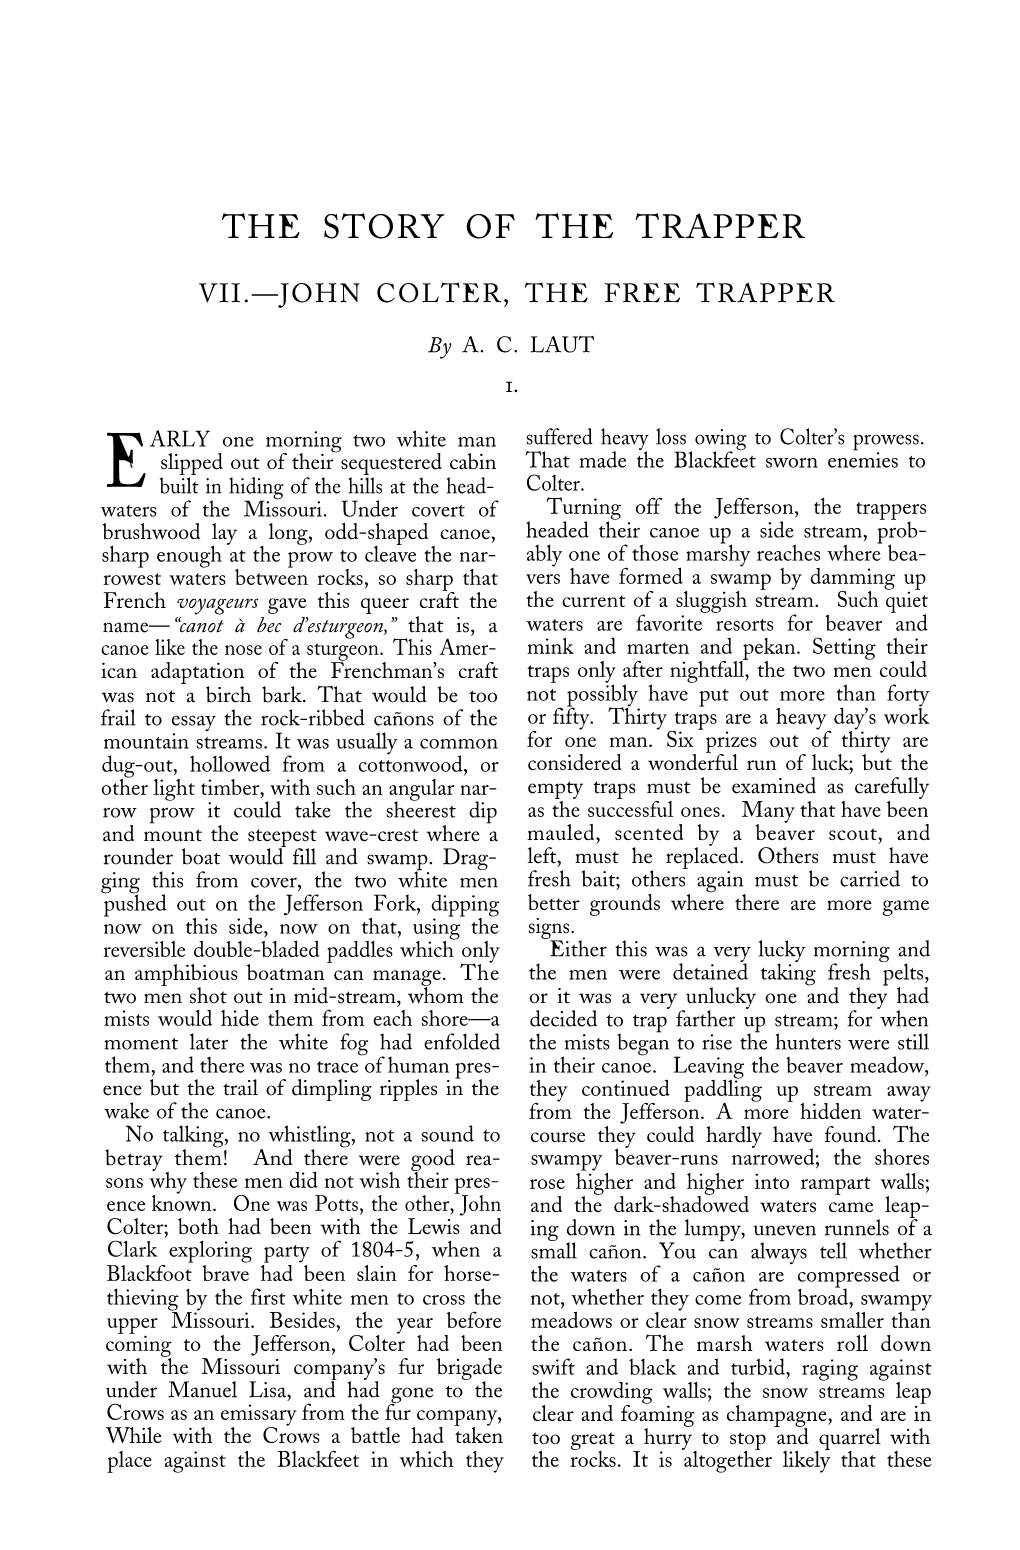 The Story of the Trapper. Viišjohn Colter, the Free Trapper